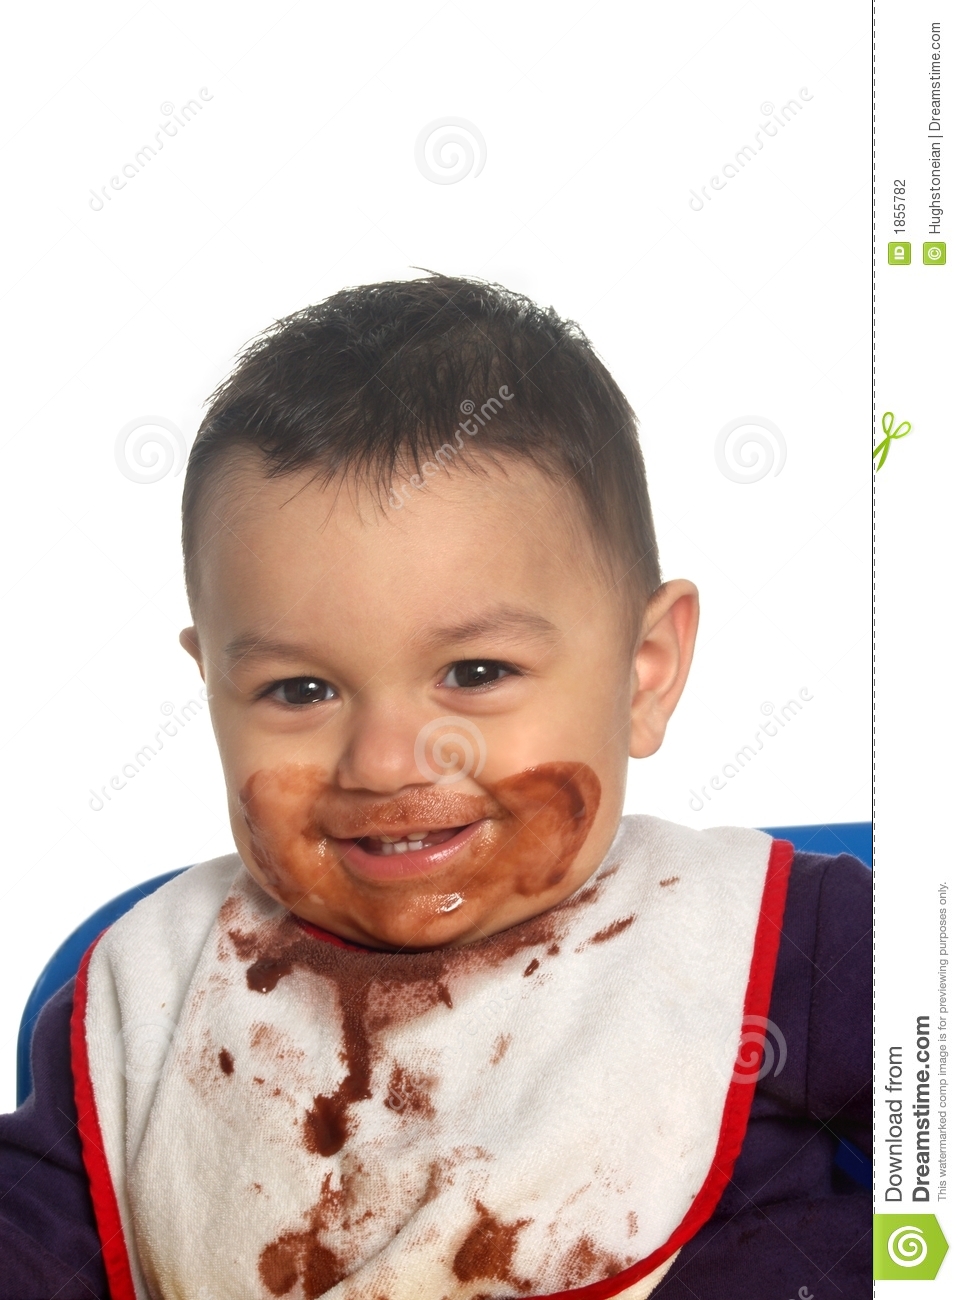 Messy Face Baby 15 Months Stock Photography   Image  1855782